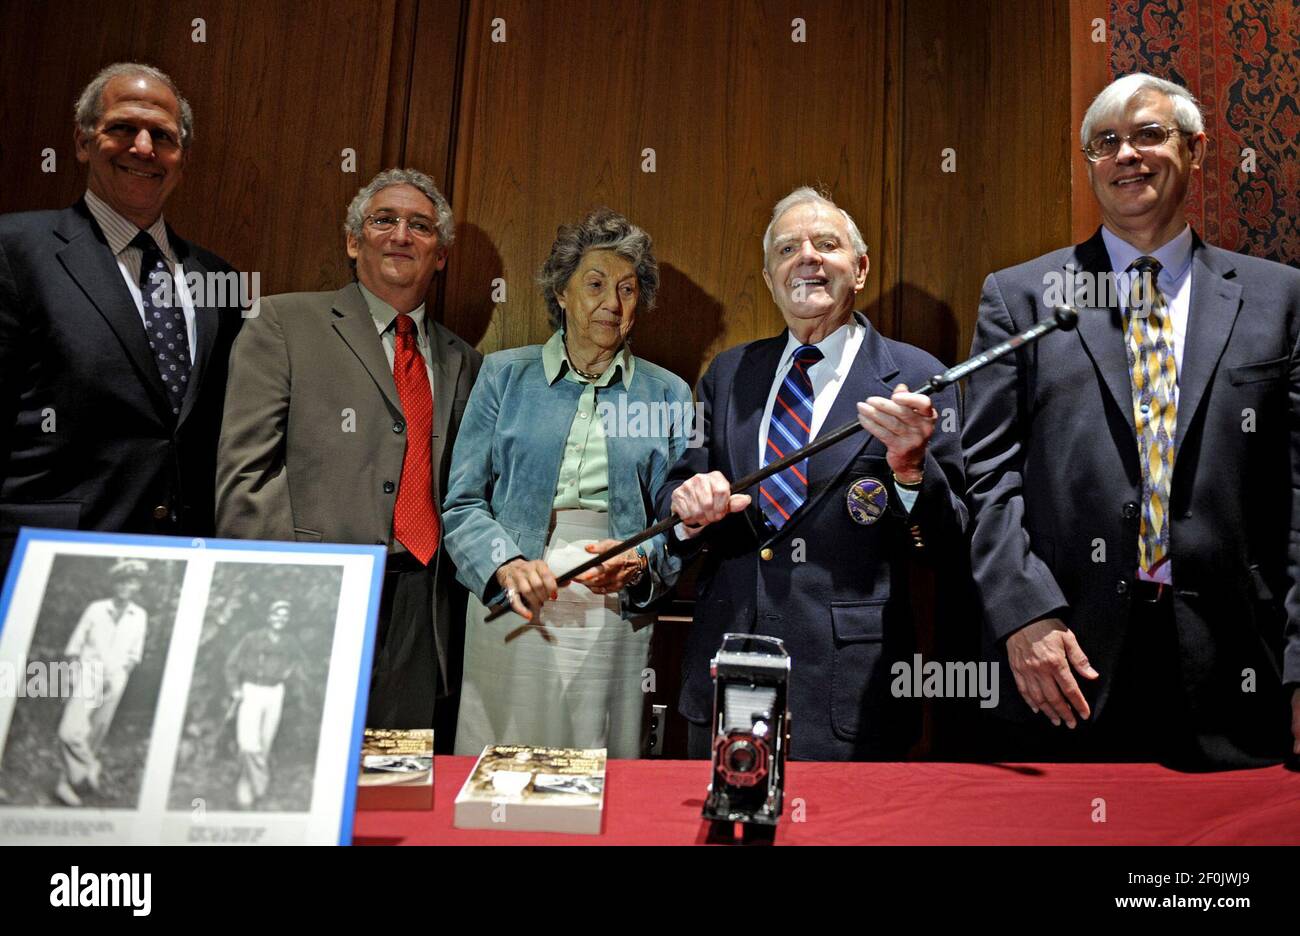 from left brent glass director national museum of american history harry rubenstein chair of the division of political history national museum of american history carolyn robinson wife of ted lt cmdr ted robinson and david allison associate director office of curatorial affairs national museum of american history pose after the ceremony where ted robinson donated his prized ironwood cane that belonged to john f kennedy to the smithsonian wednesday april 21 2010 photo by mary f calvertmctsipa usa 2F0JWJ9